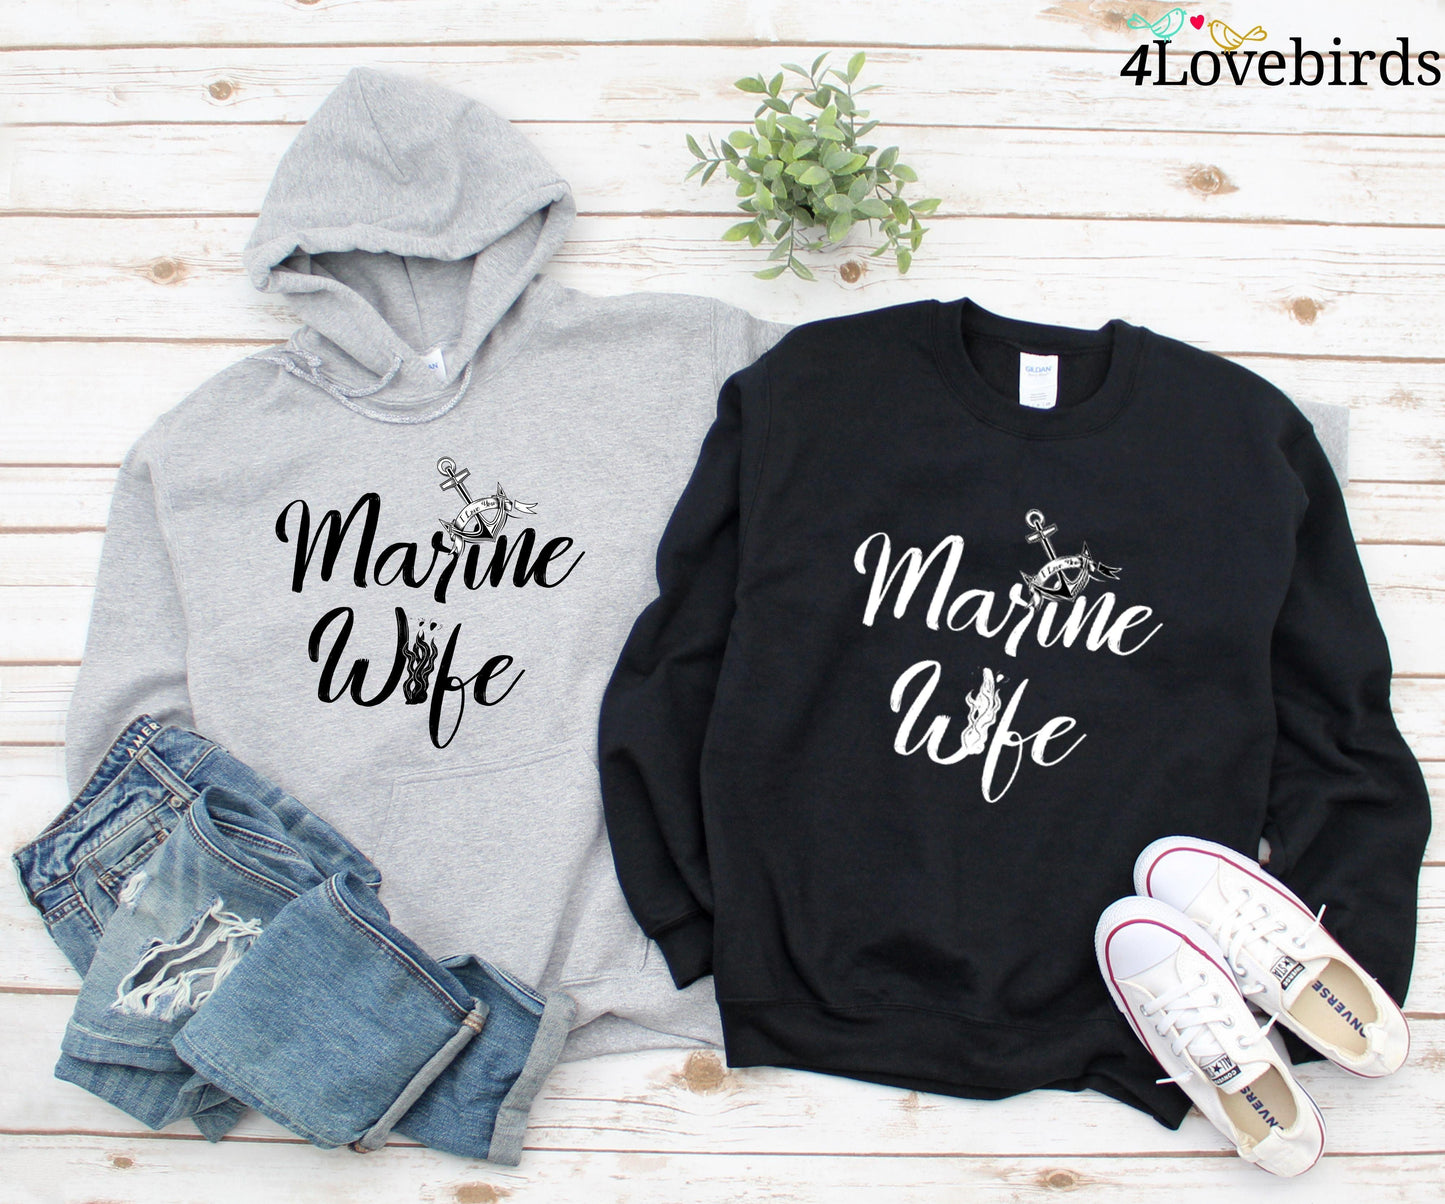 Marine Wife T-shirt, Military Hoodies, Law Enforcement Sweatshirts, Military Gifts, For Wives, For Her - 4Lovebirds